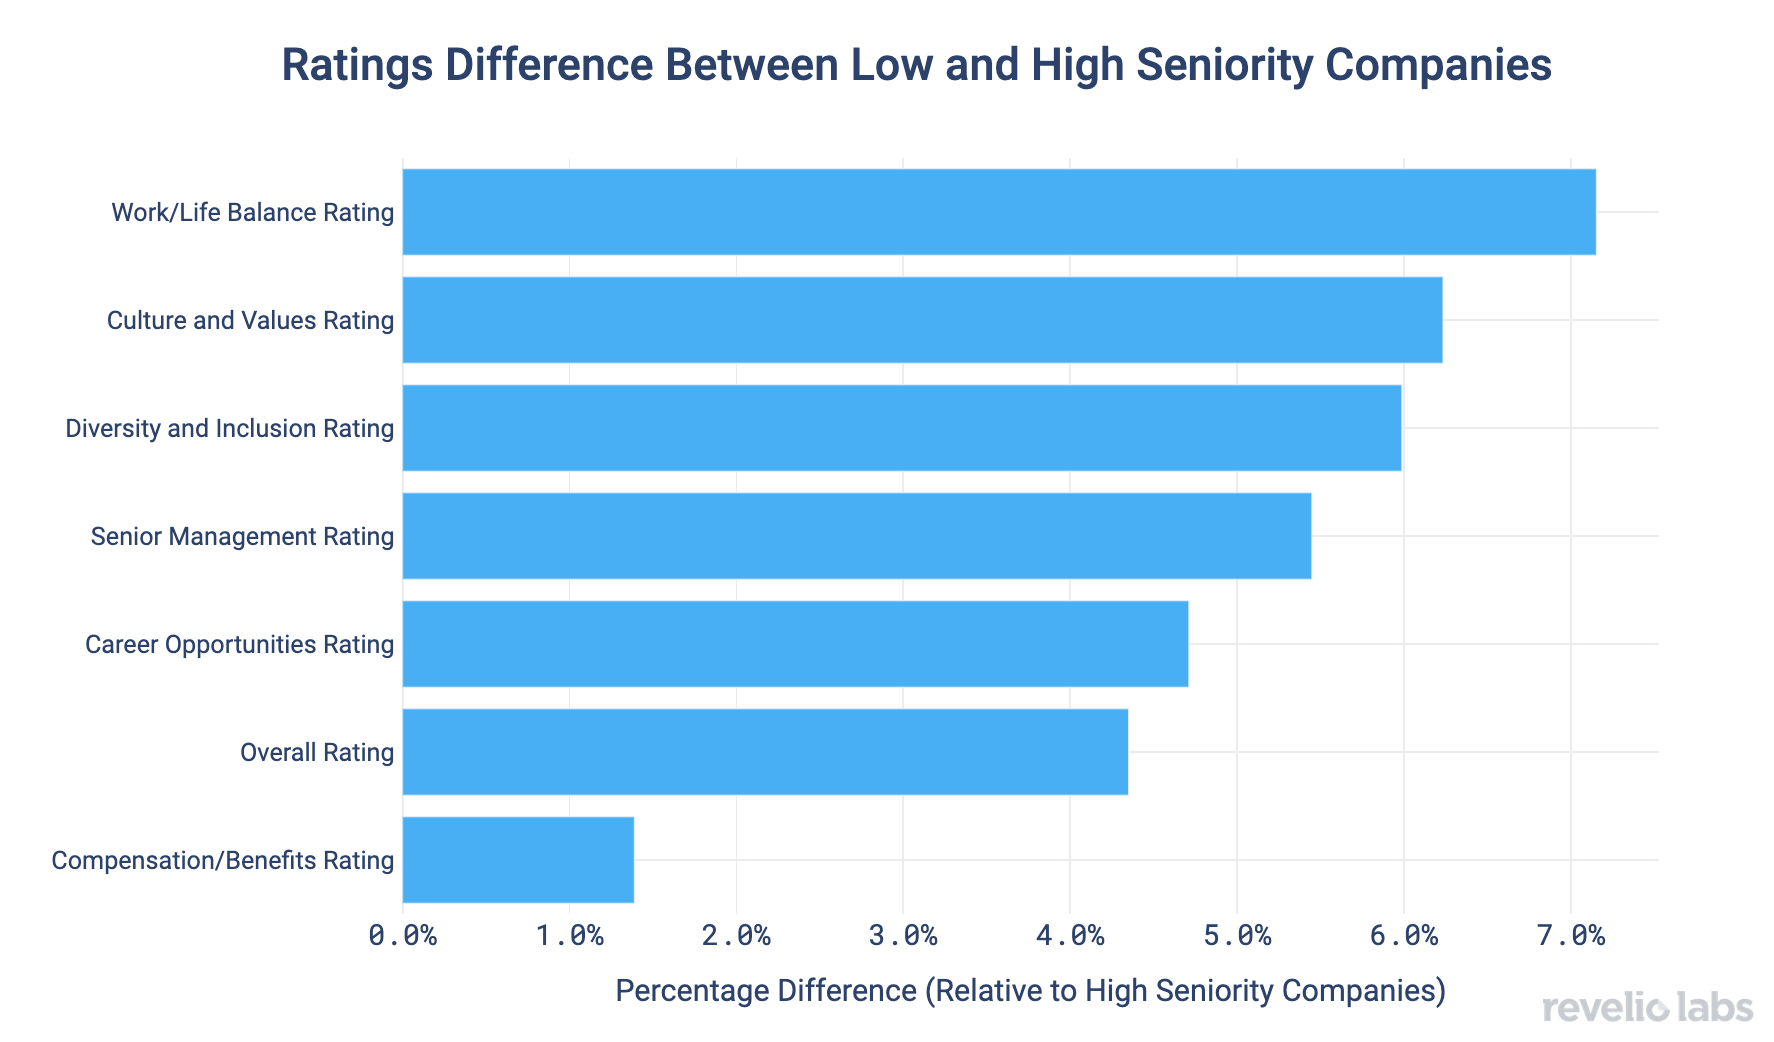 Ratings difference between low and high seniority companies